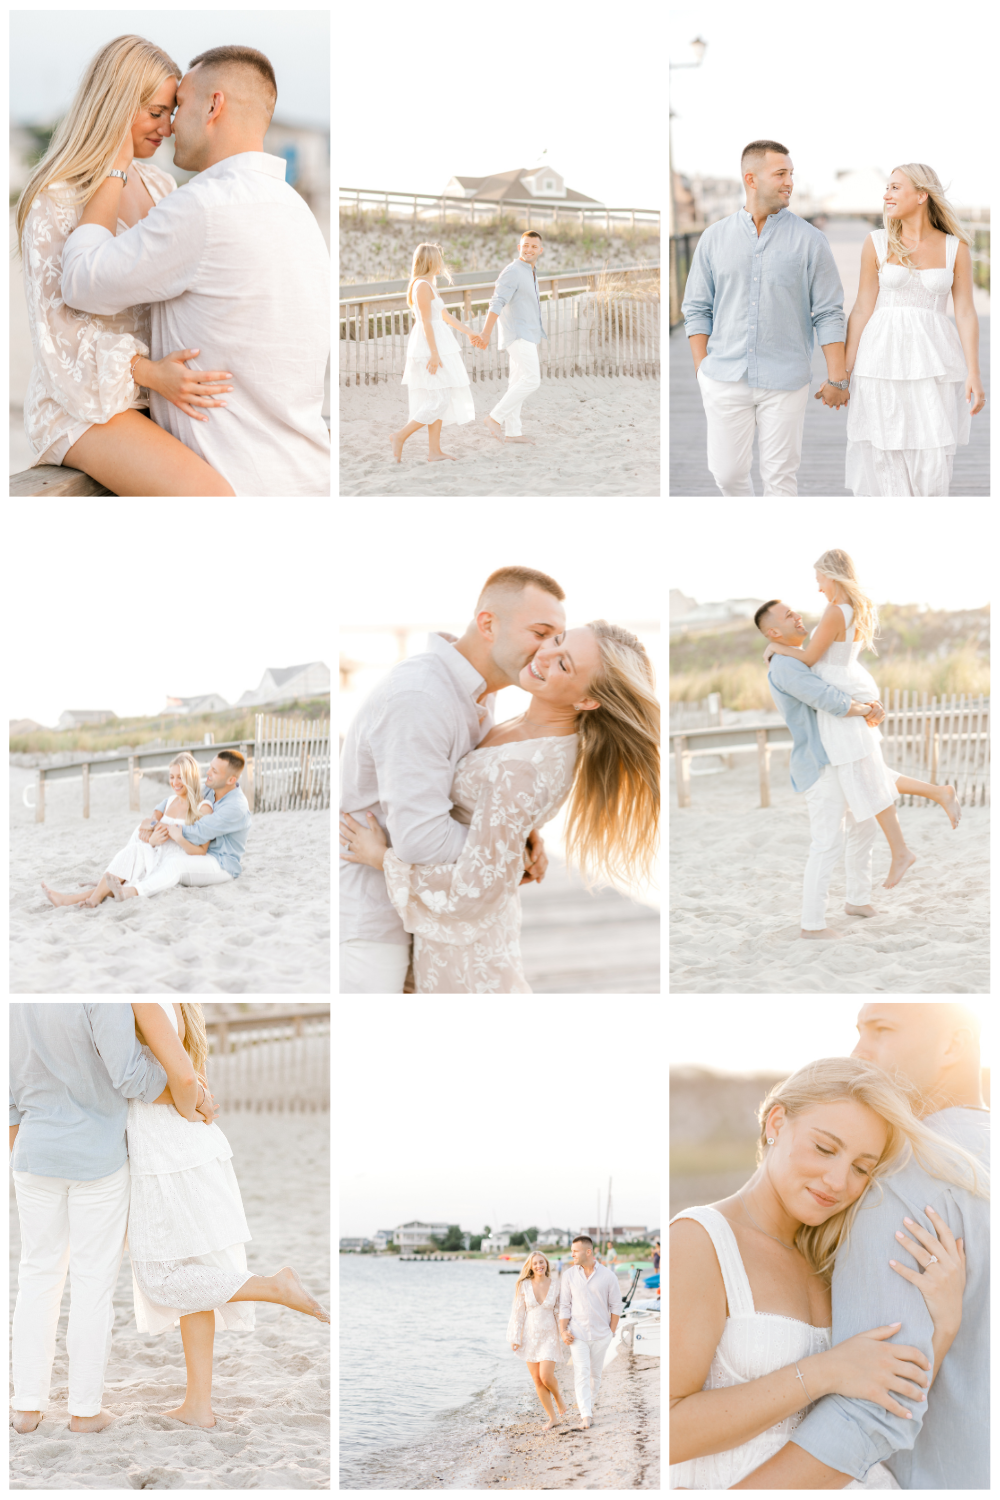 Beach Engagement Session in Lavallette, NJ on the beach and bay photographed by New Jersey wedding photographer Susan Elizabeth Photography